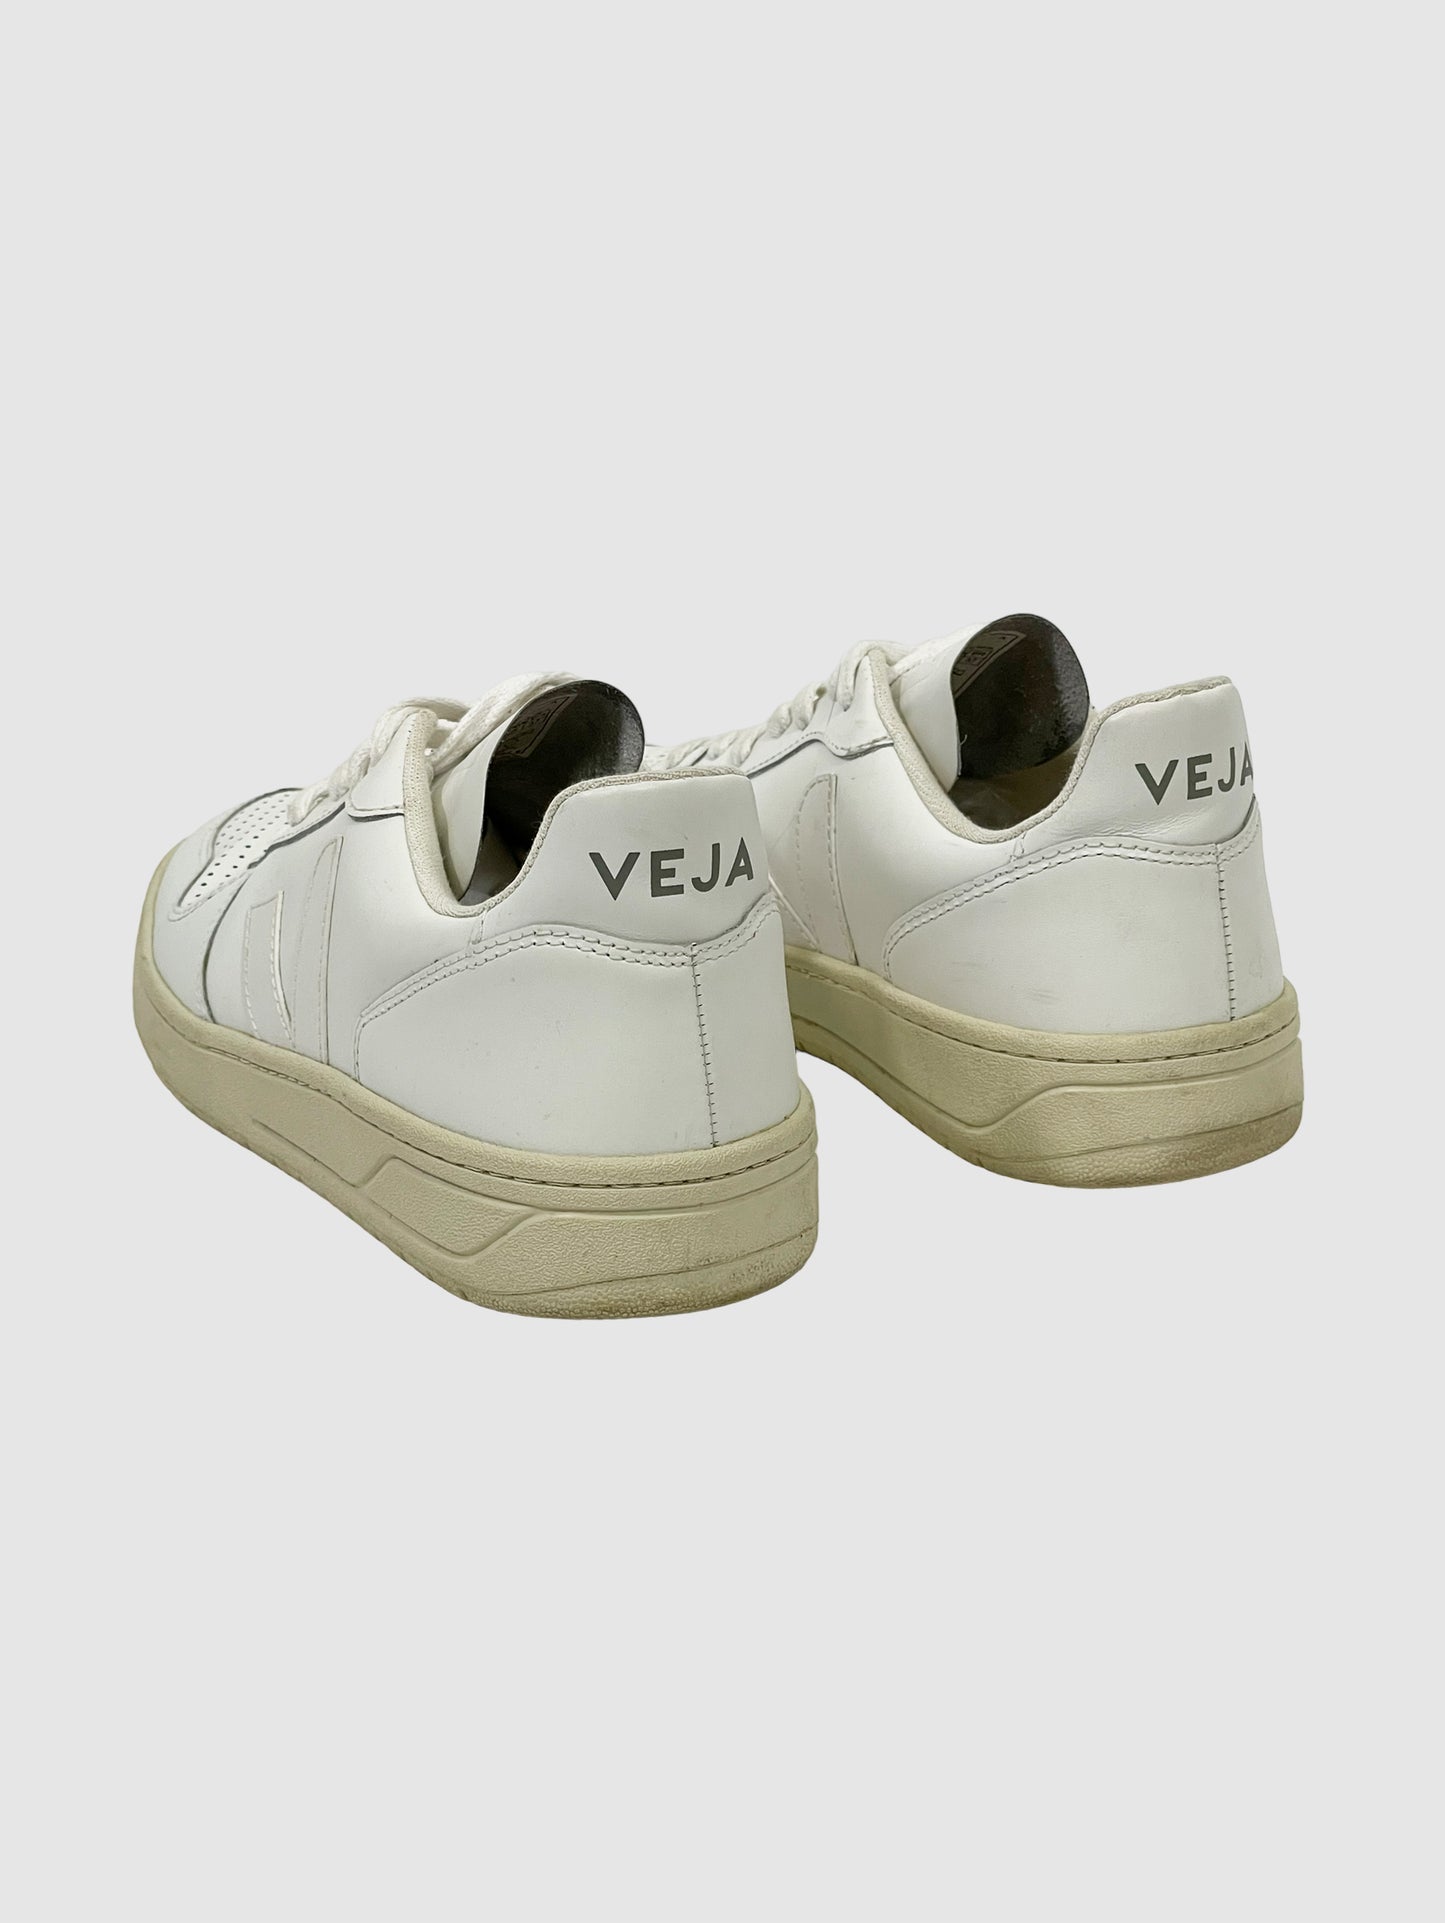 Veja Low Top Sneakers - Size 8